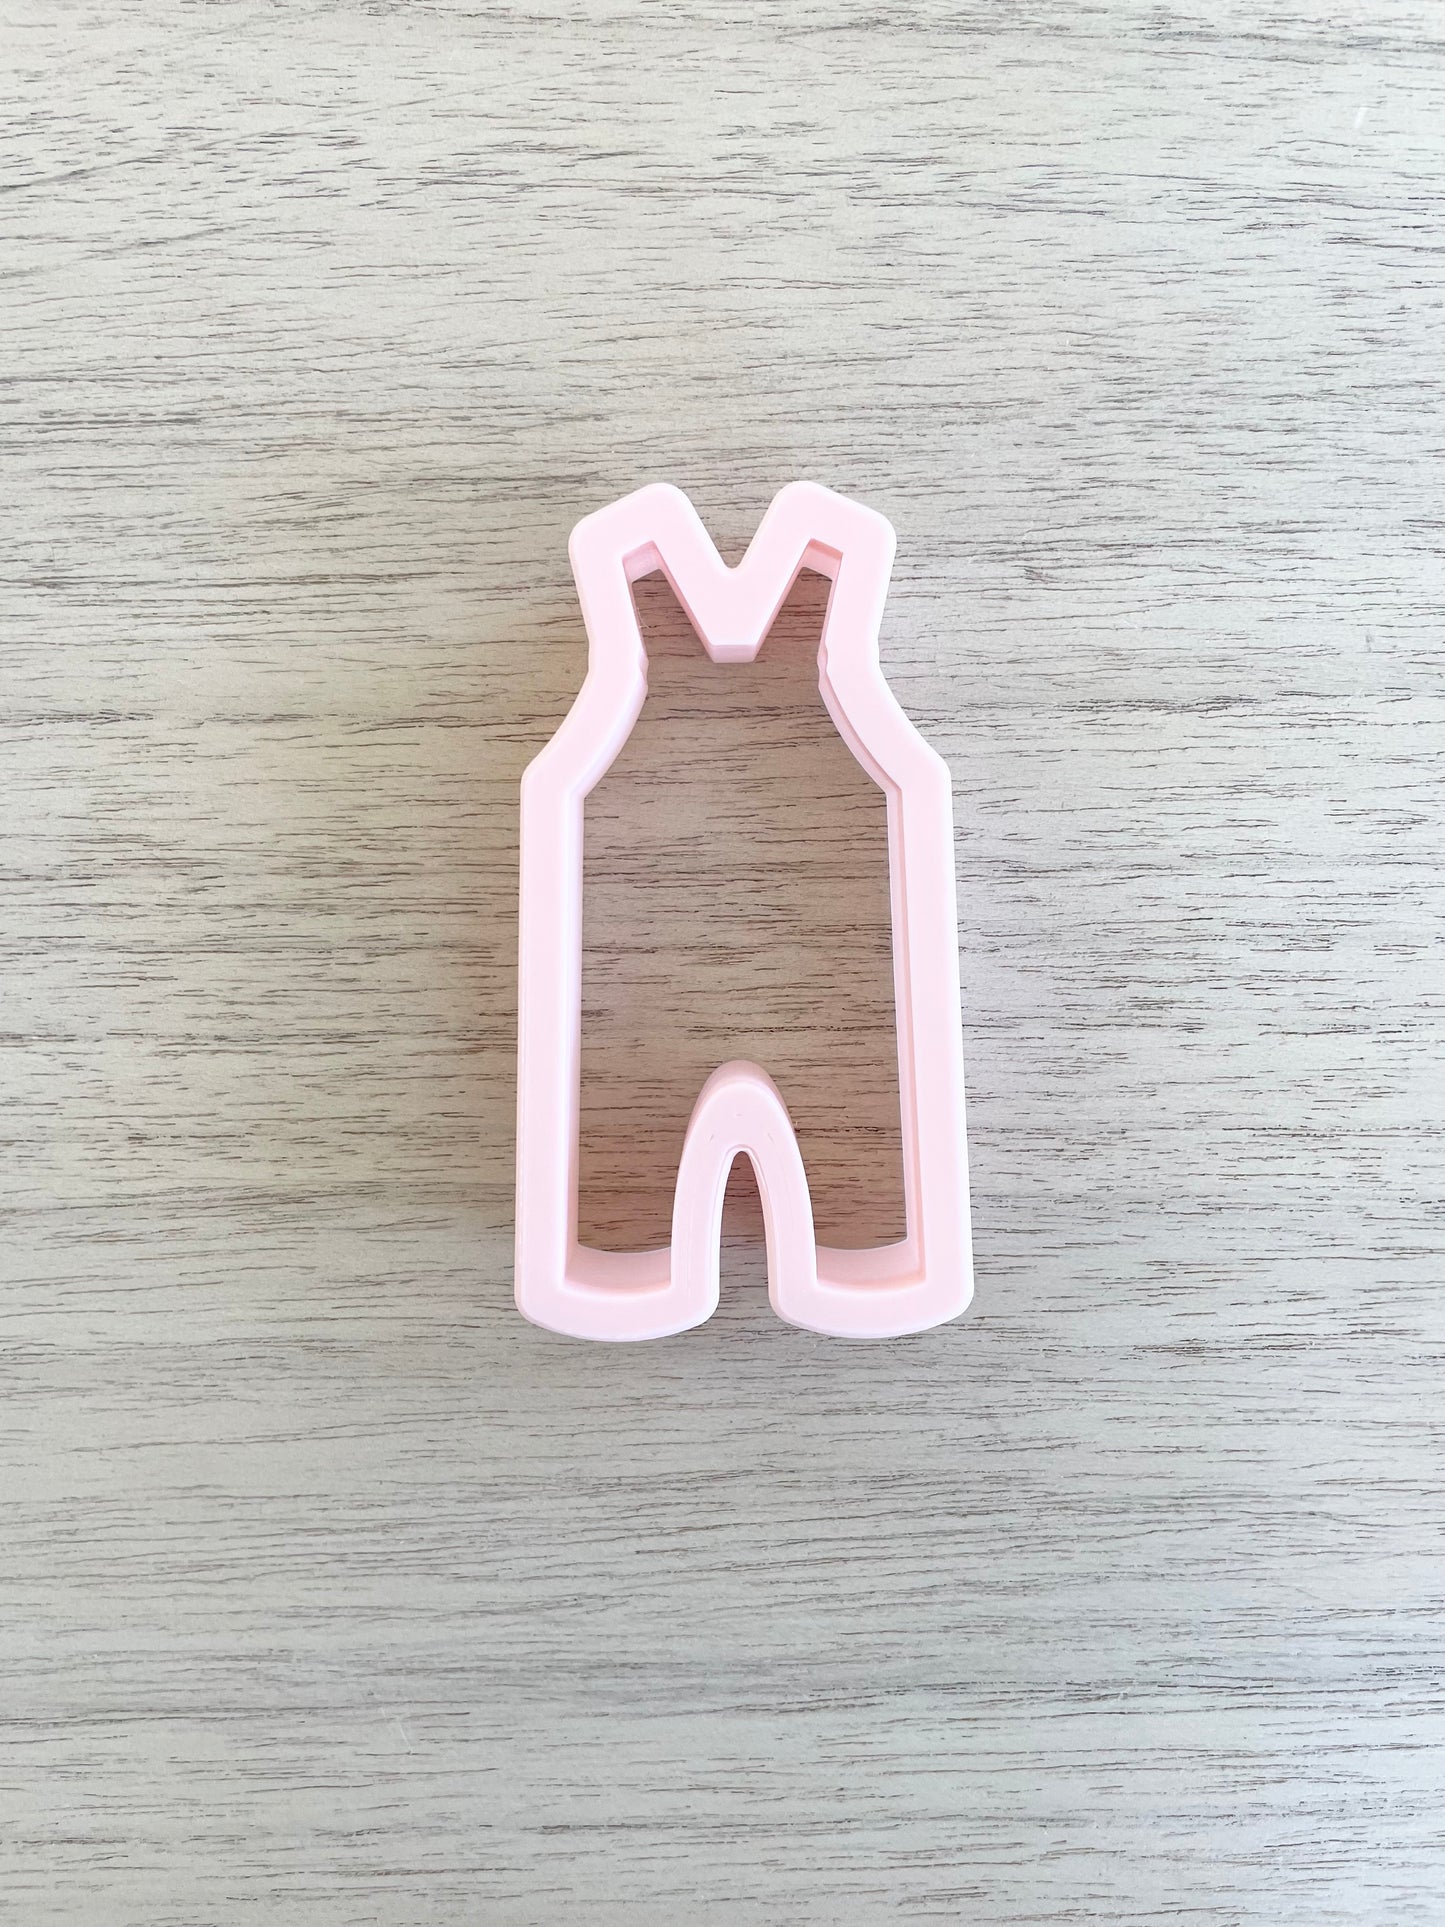 Baby Overalls Cookie Cutter